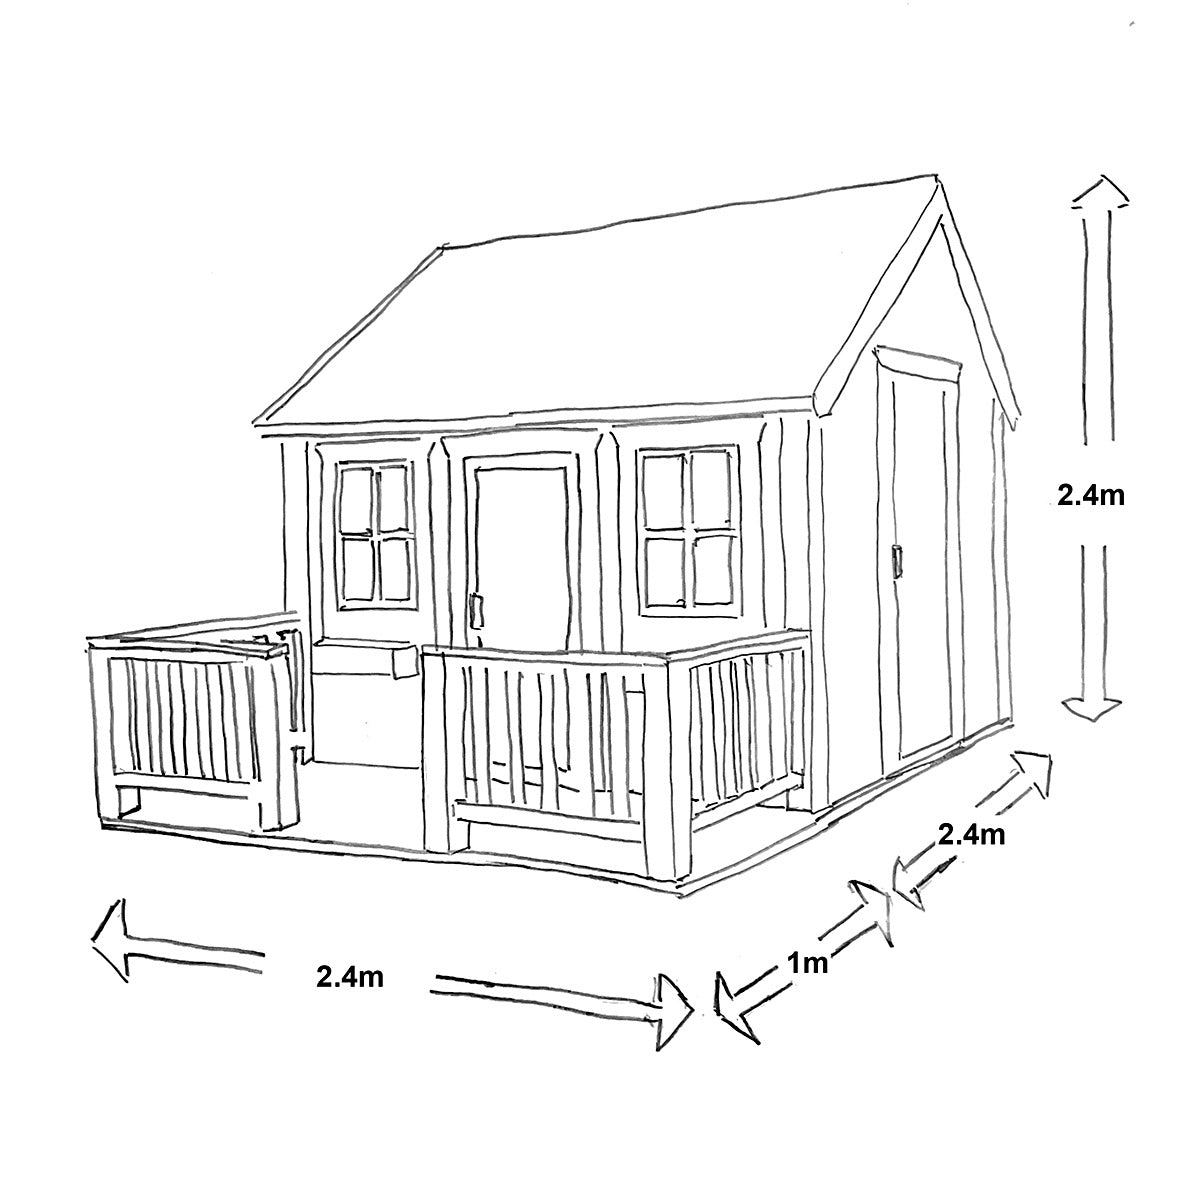 Hand drawing of kids playhouse with dimensions by KidsPlayHouses_EU